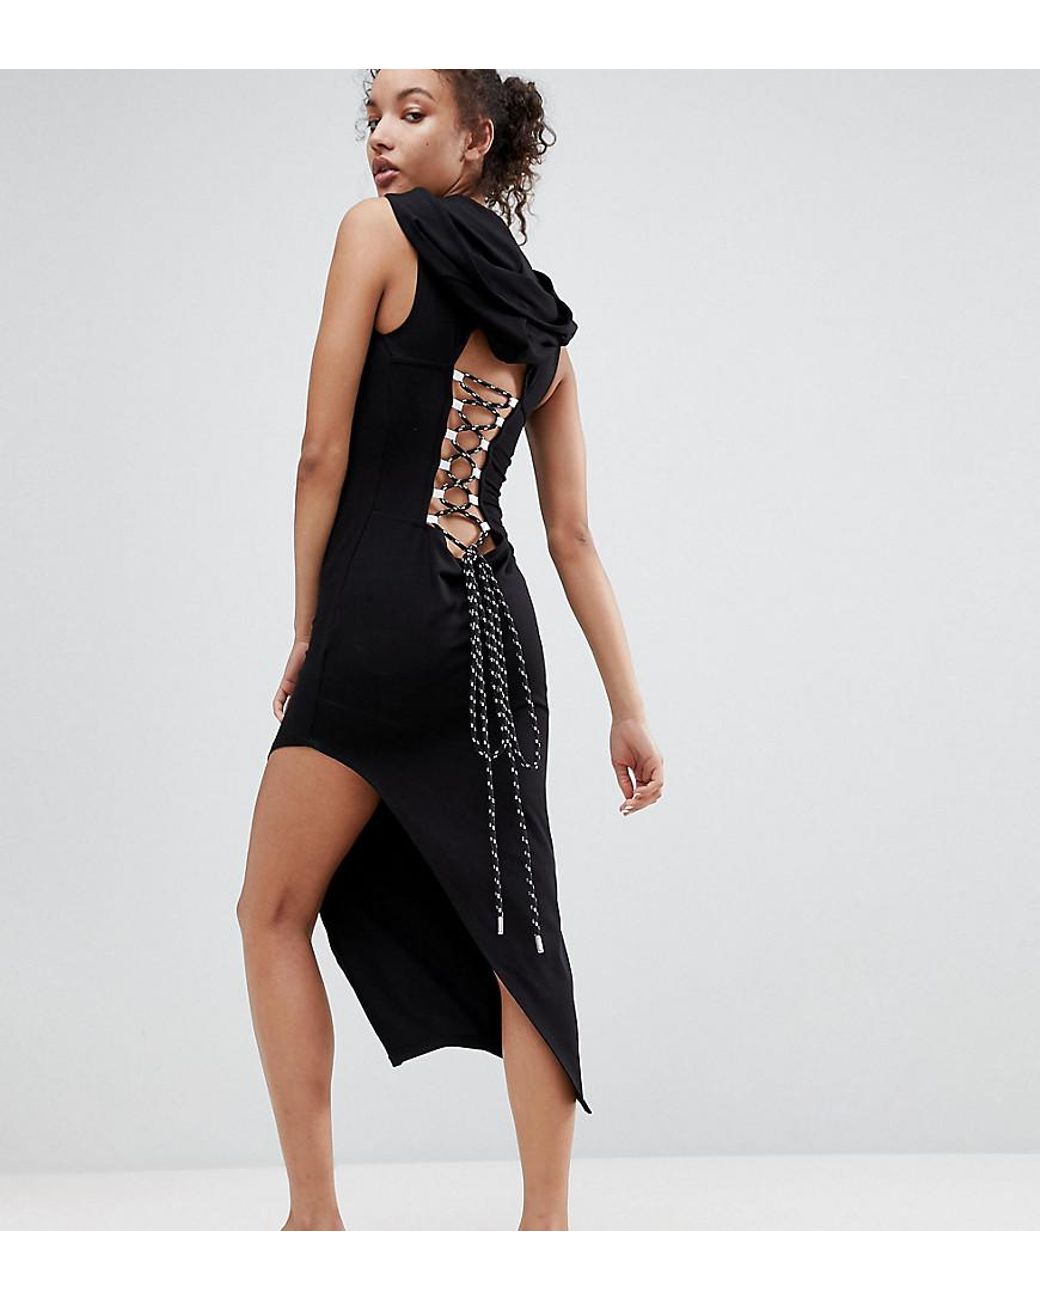 Ivy Park Lace Up Cutaway Dress in Black | Lyst